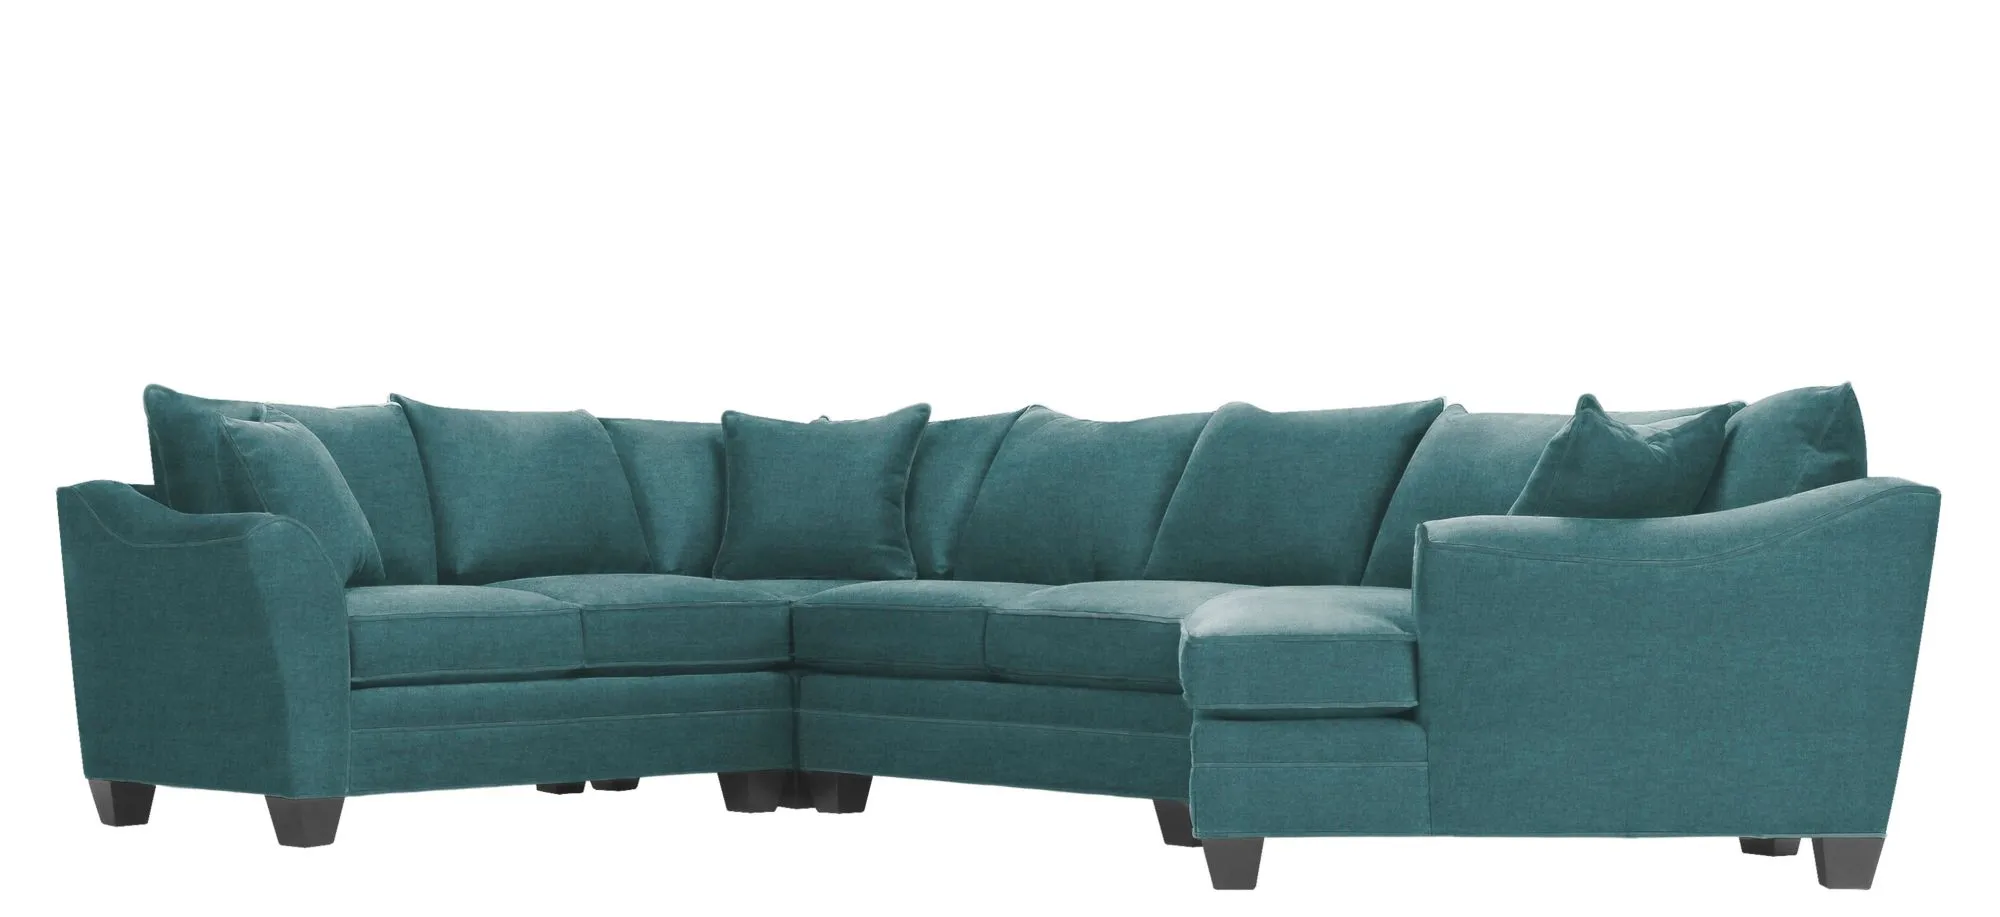 Foresthill 4-pc. Right Hand Cuddler with Loveseat Sectional Sofa in Santa Rosa Turquoise by H.M. Richards